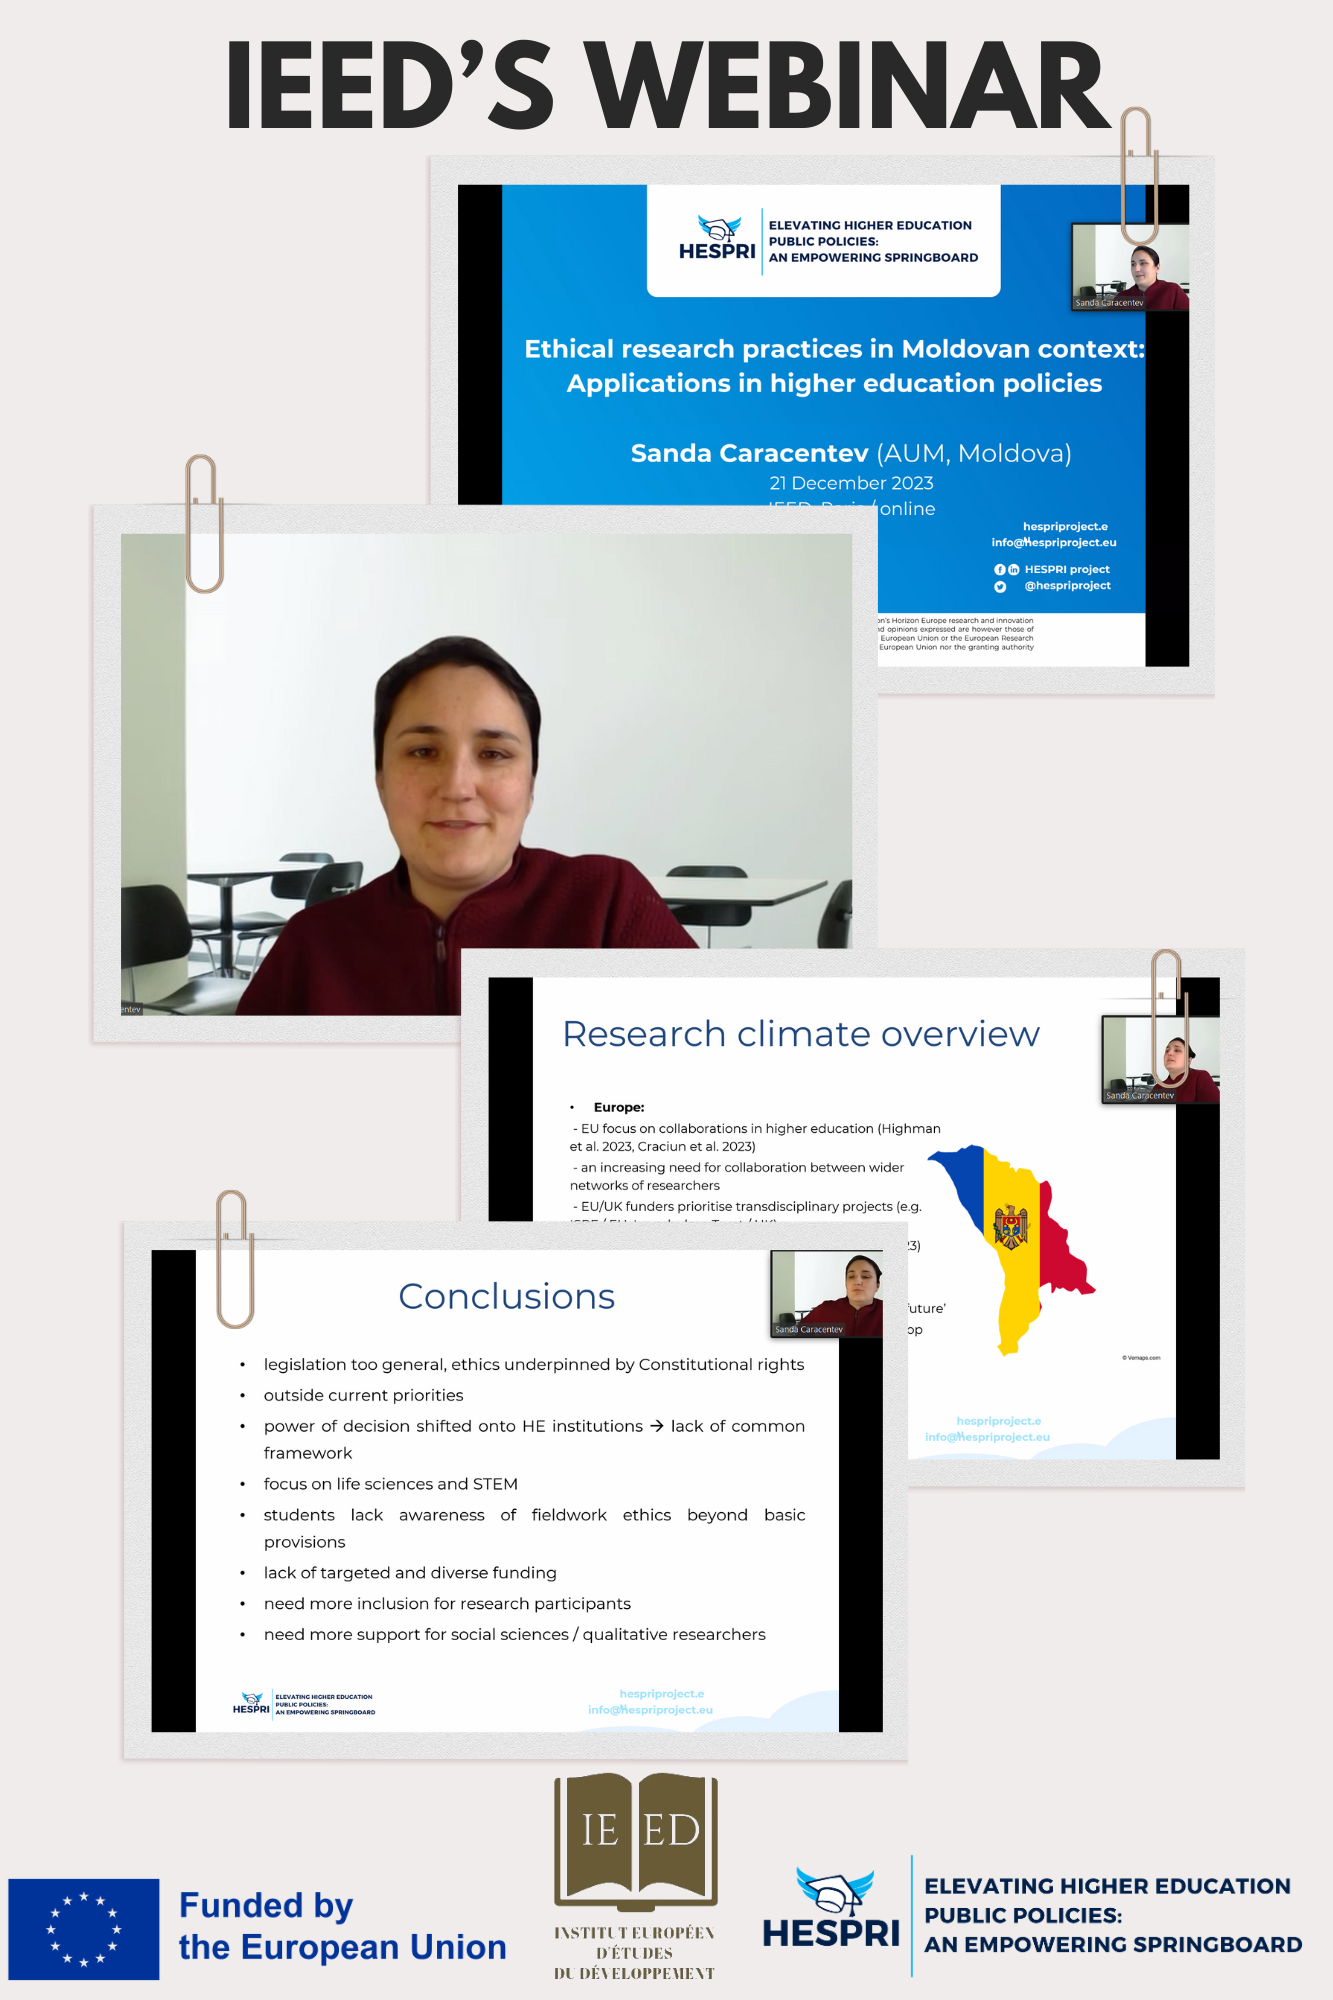 Webinar: Ethical Research Practices in Moldovan Context